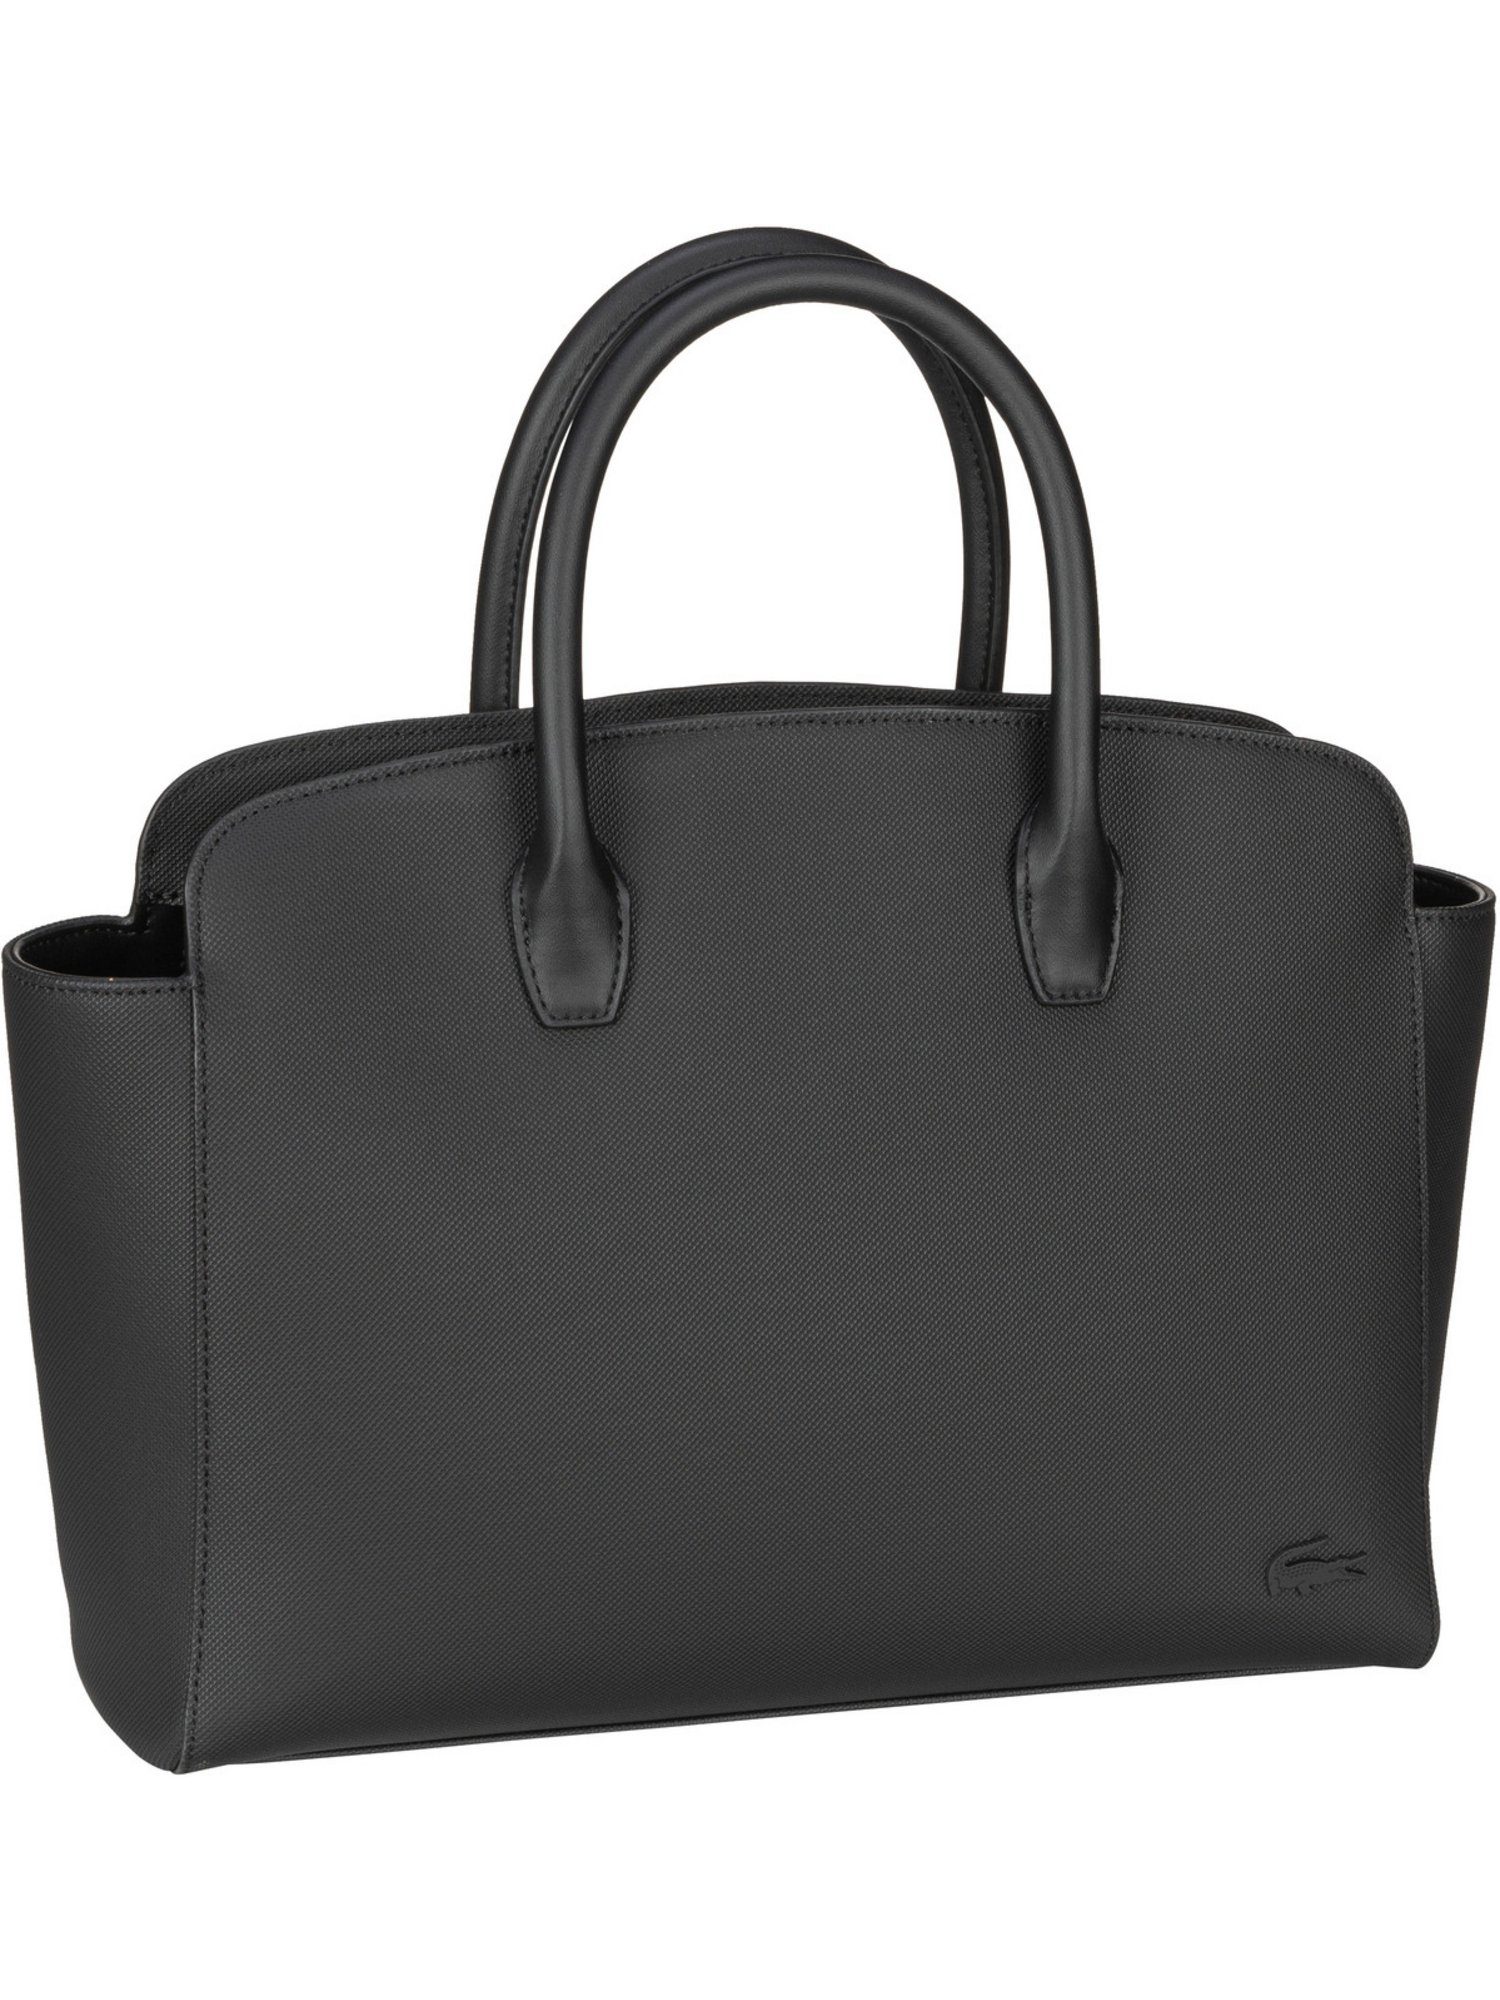 Lacoste Handtasche Daily Handle Bag 4092, Top M Lifestyle Tote Bag